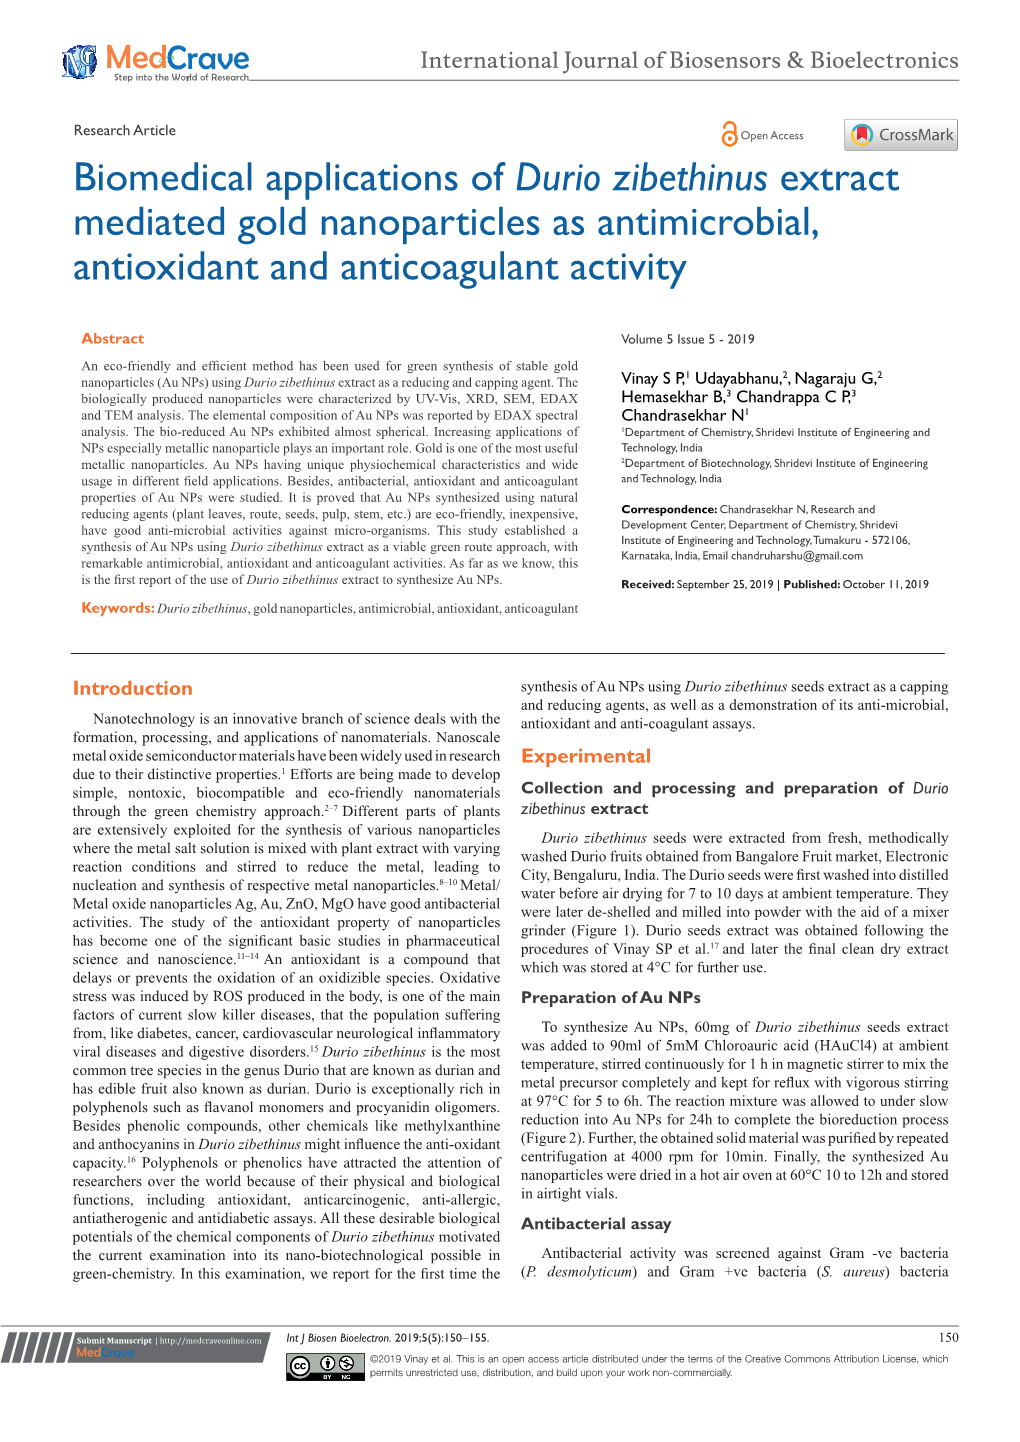 Durio Zibethinus Extract Mediated Gold Nanoparticles As Antimicrobial, Antioxidant and Anticoagulant Activity